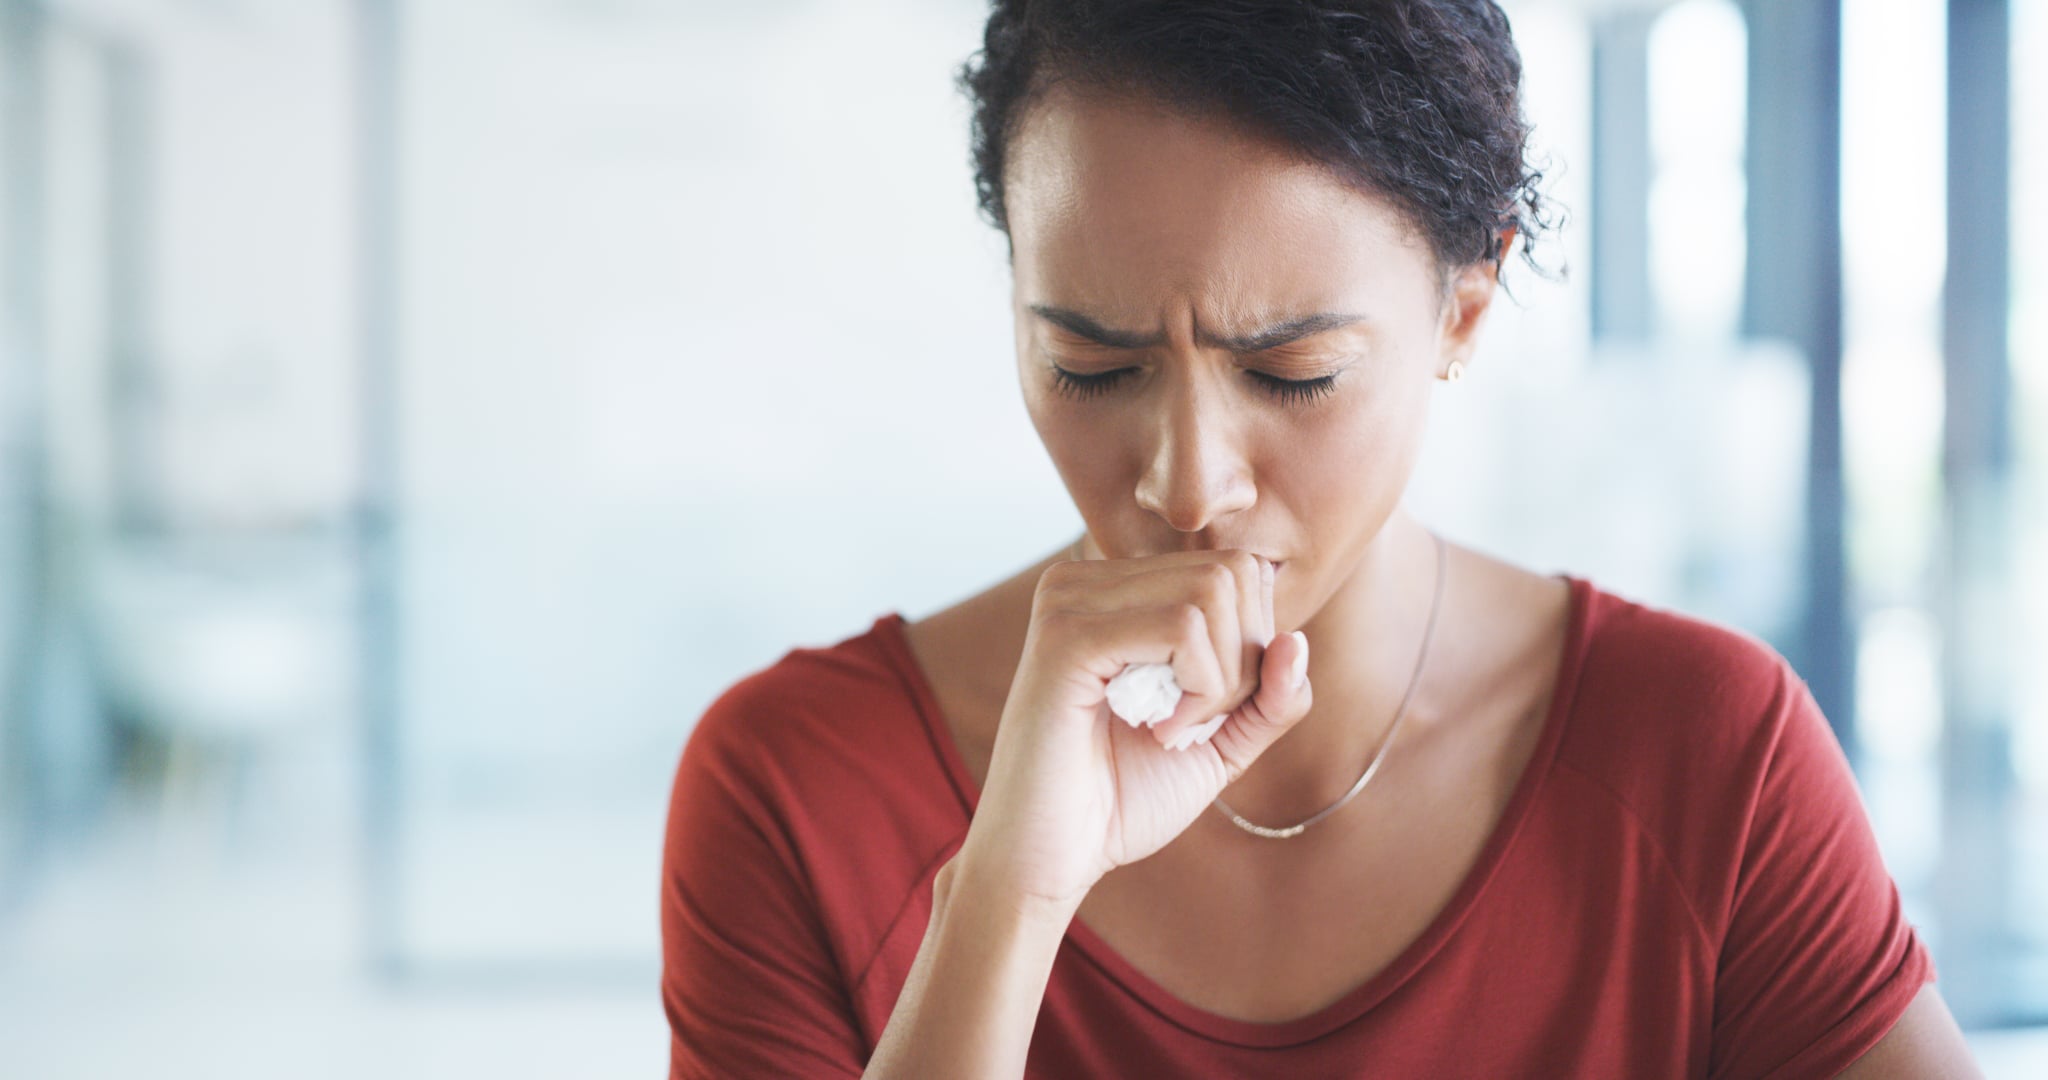 If You Frequently Cough After Eating, You May Want to Talk to Your Doctor